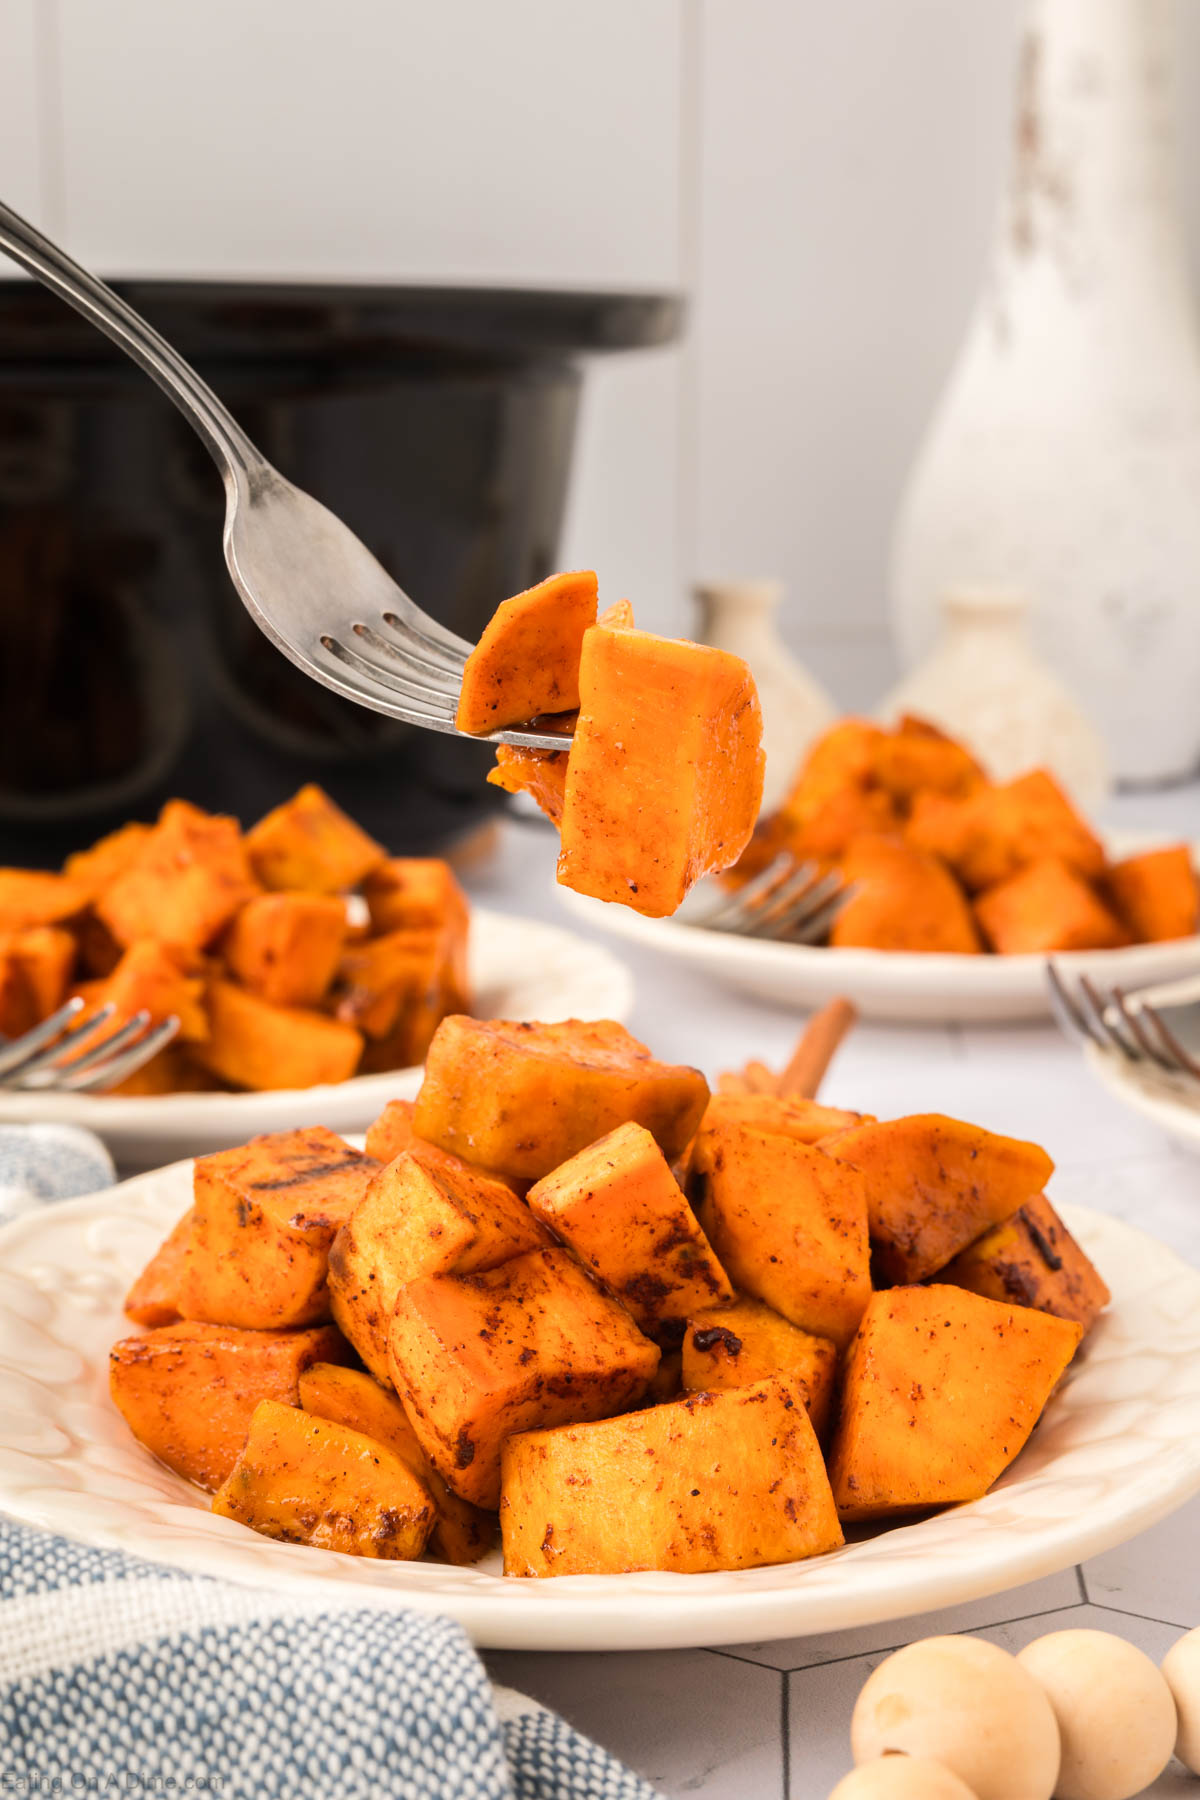 Candied Yams in a plate